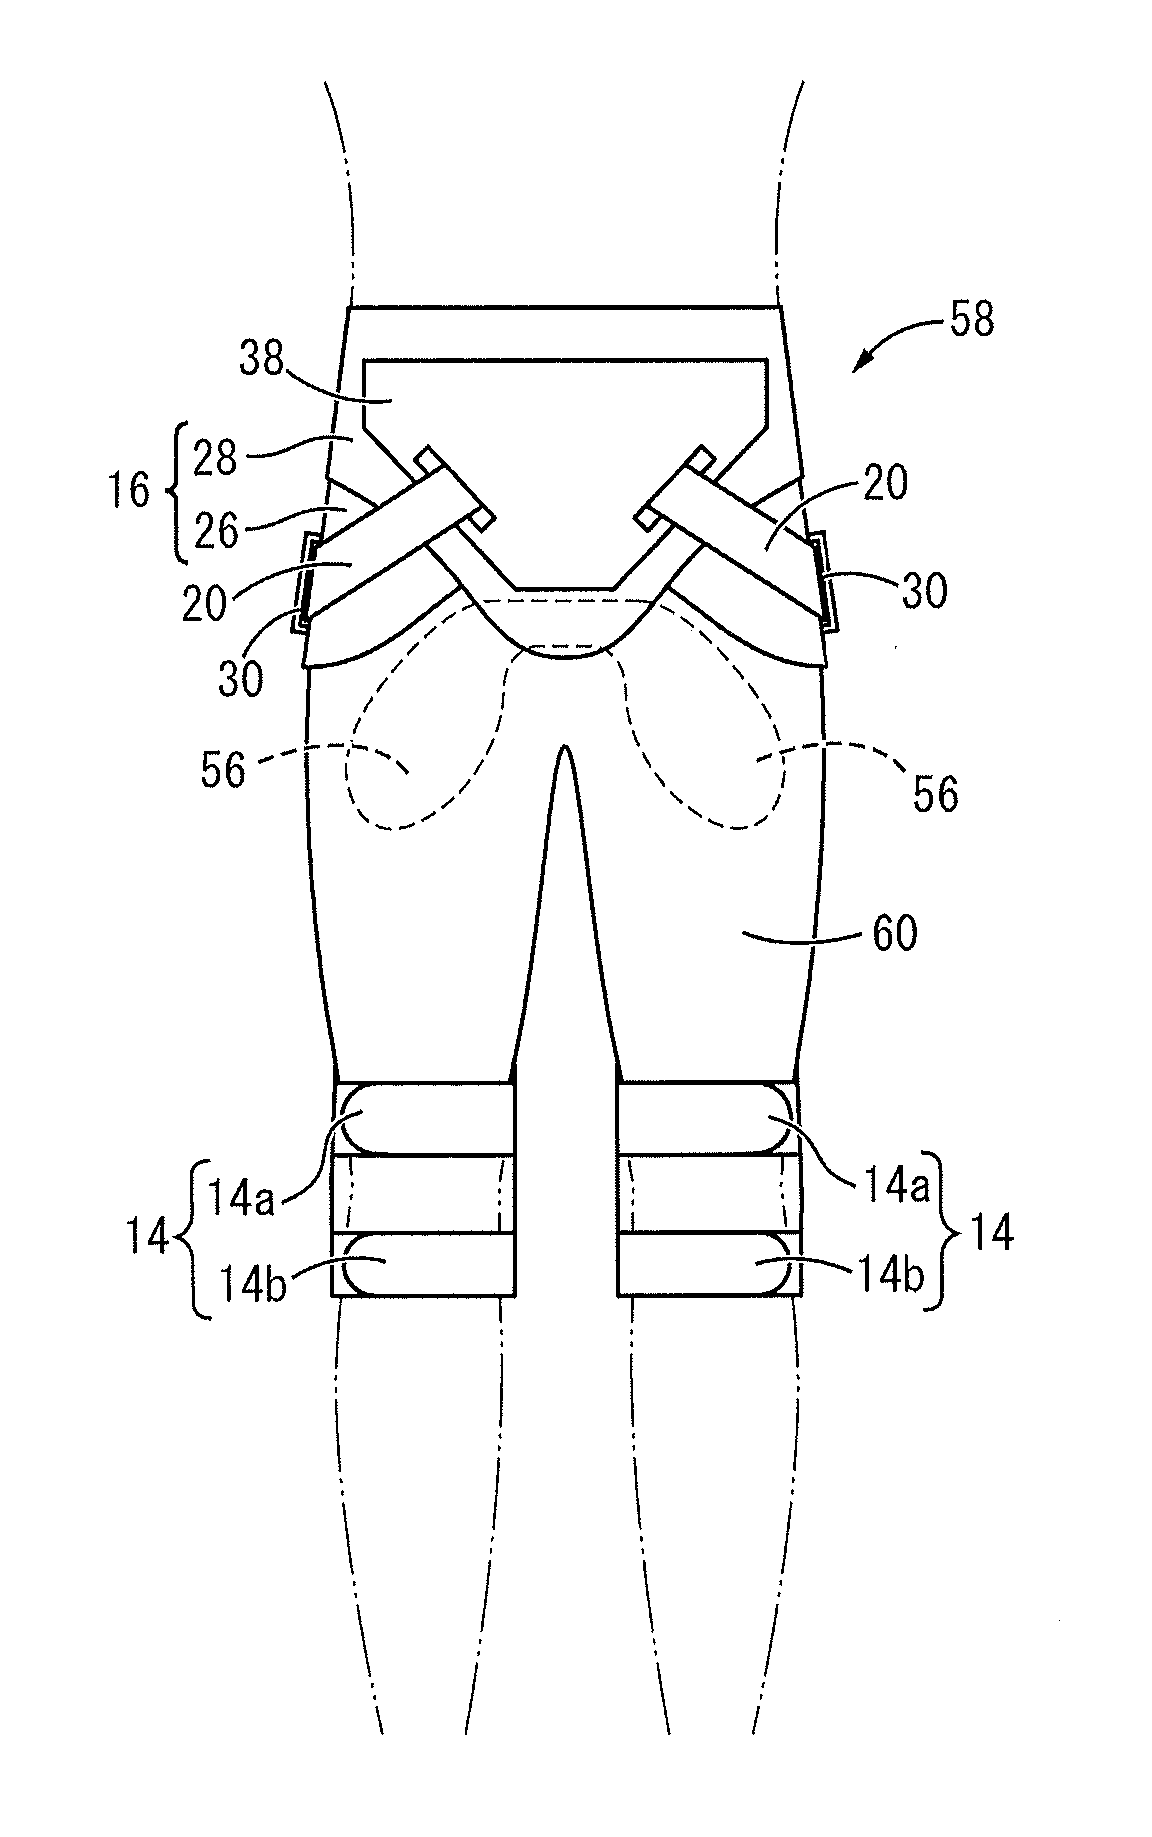 Swinging leg pendulum movement aid for walking, and assistance force control method